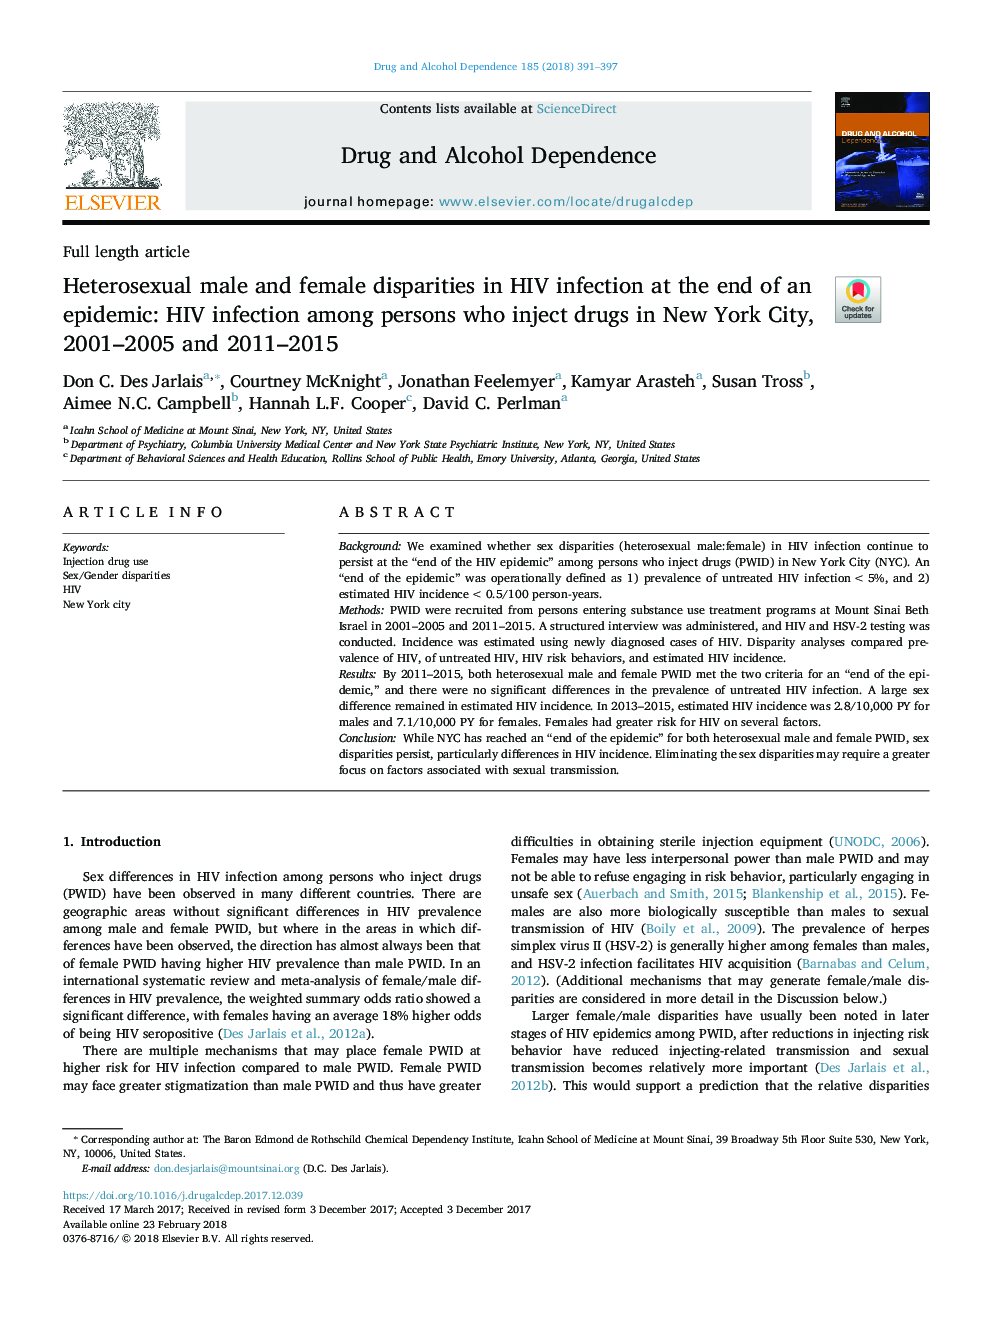 Heterosexual male and female disparities in HIV infection at the end of an epidemic: HIV infection among persons who inject drugs in New York City, 2001-2005 and 2011-2015